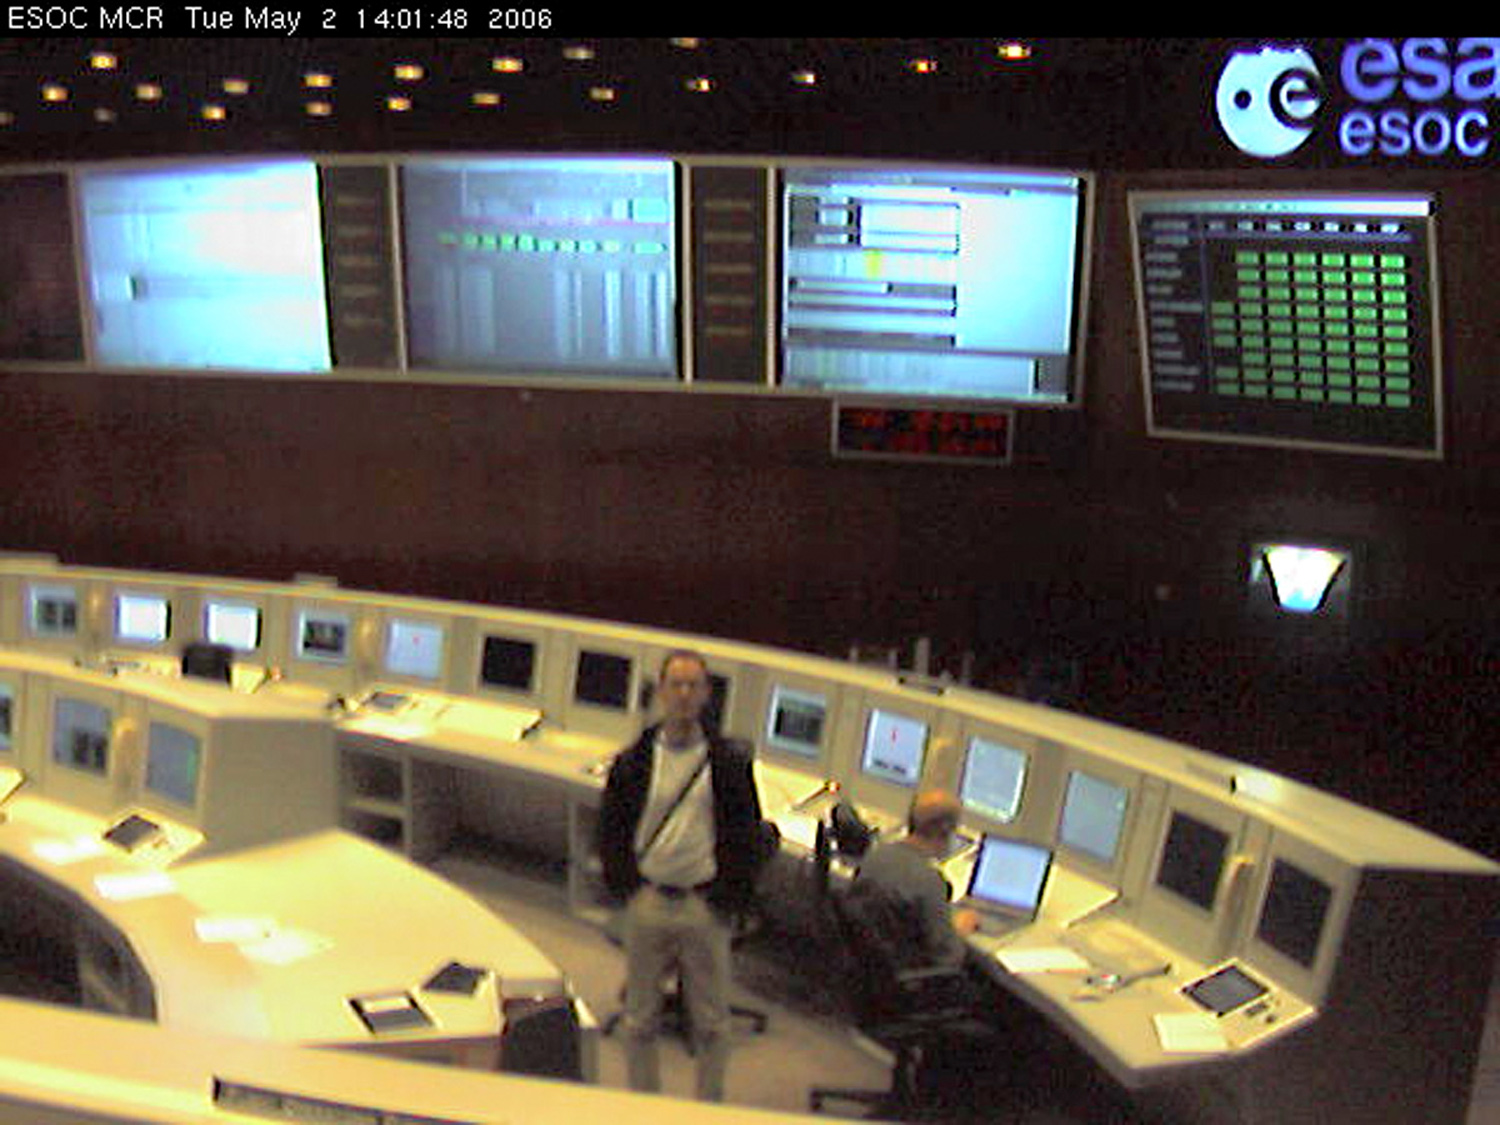 European Space Operations Centre, Darmstadt, Germany, 2006